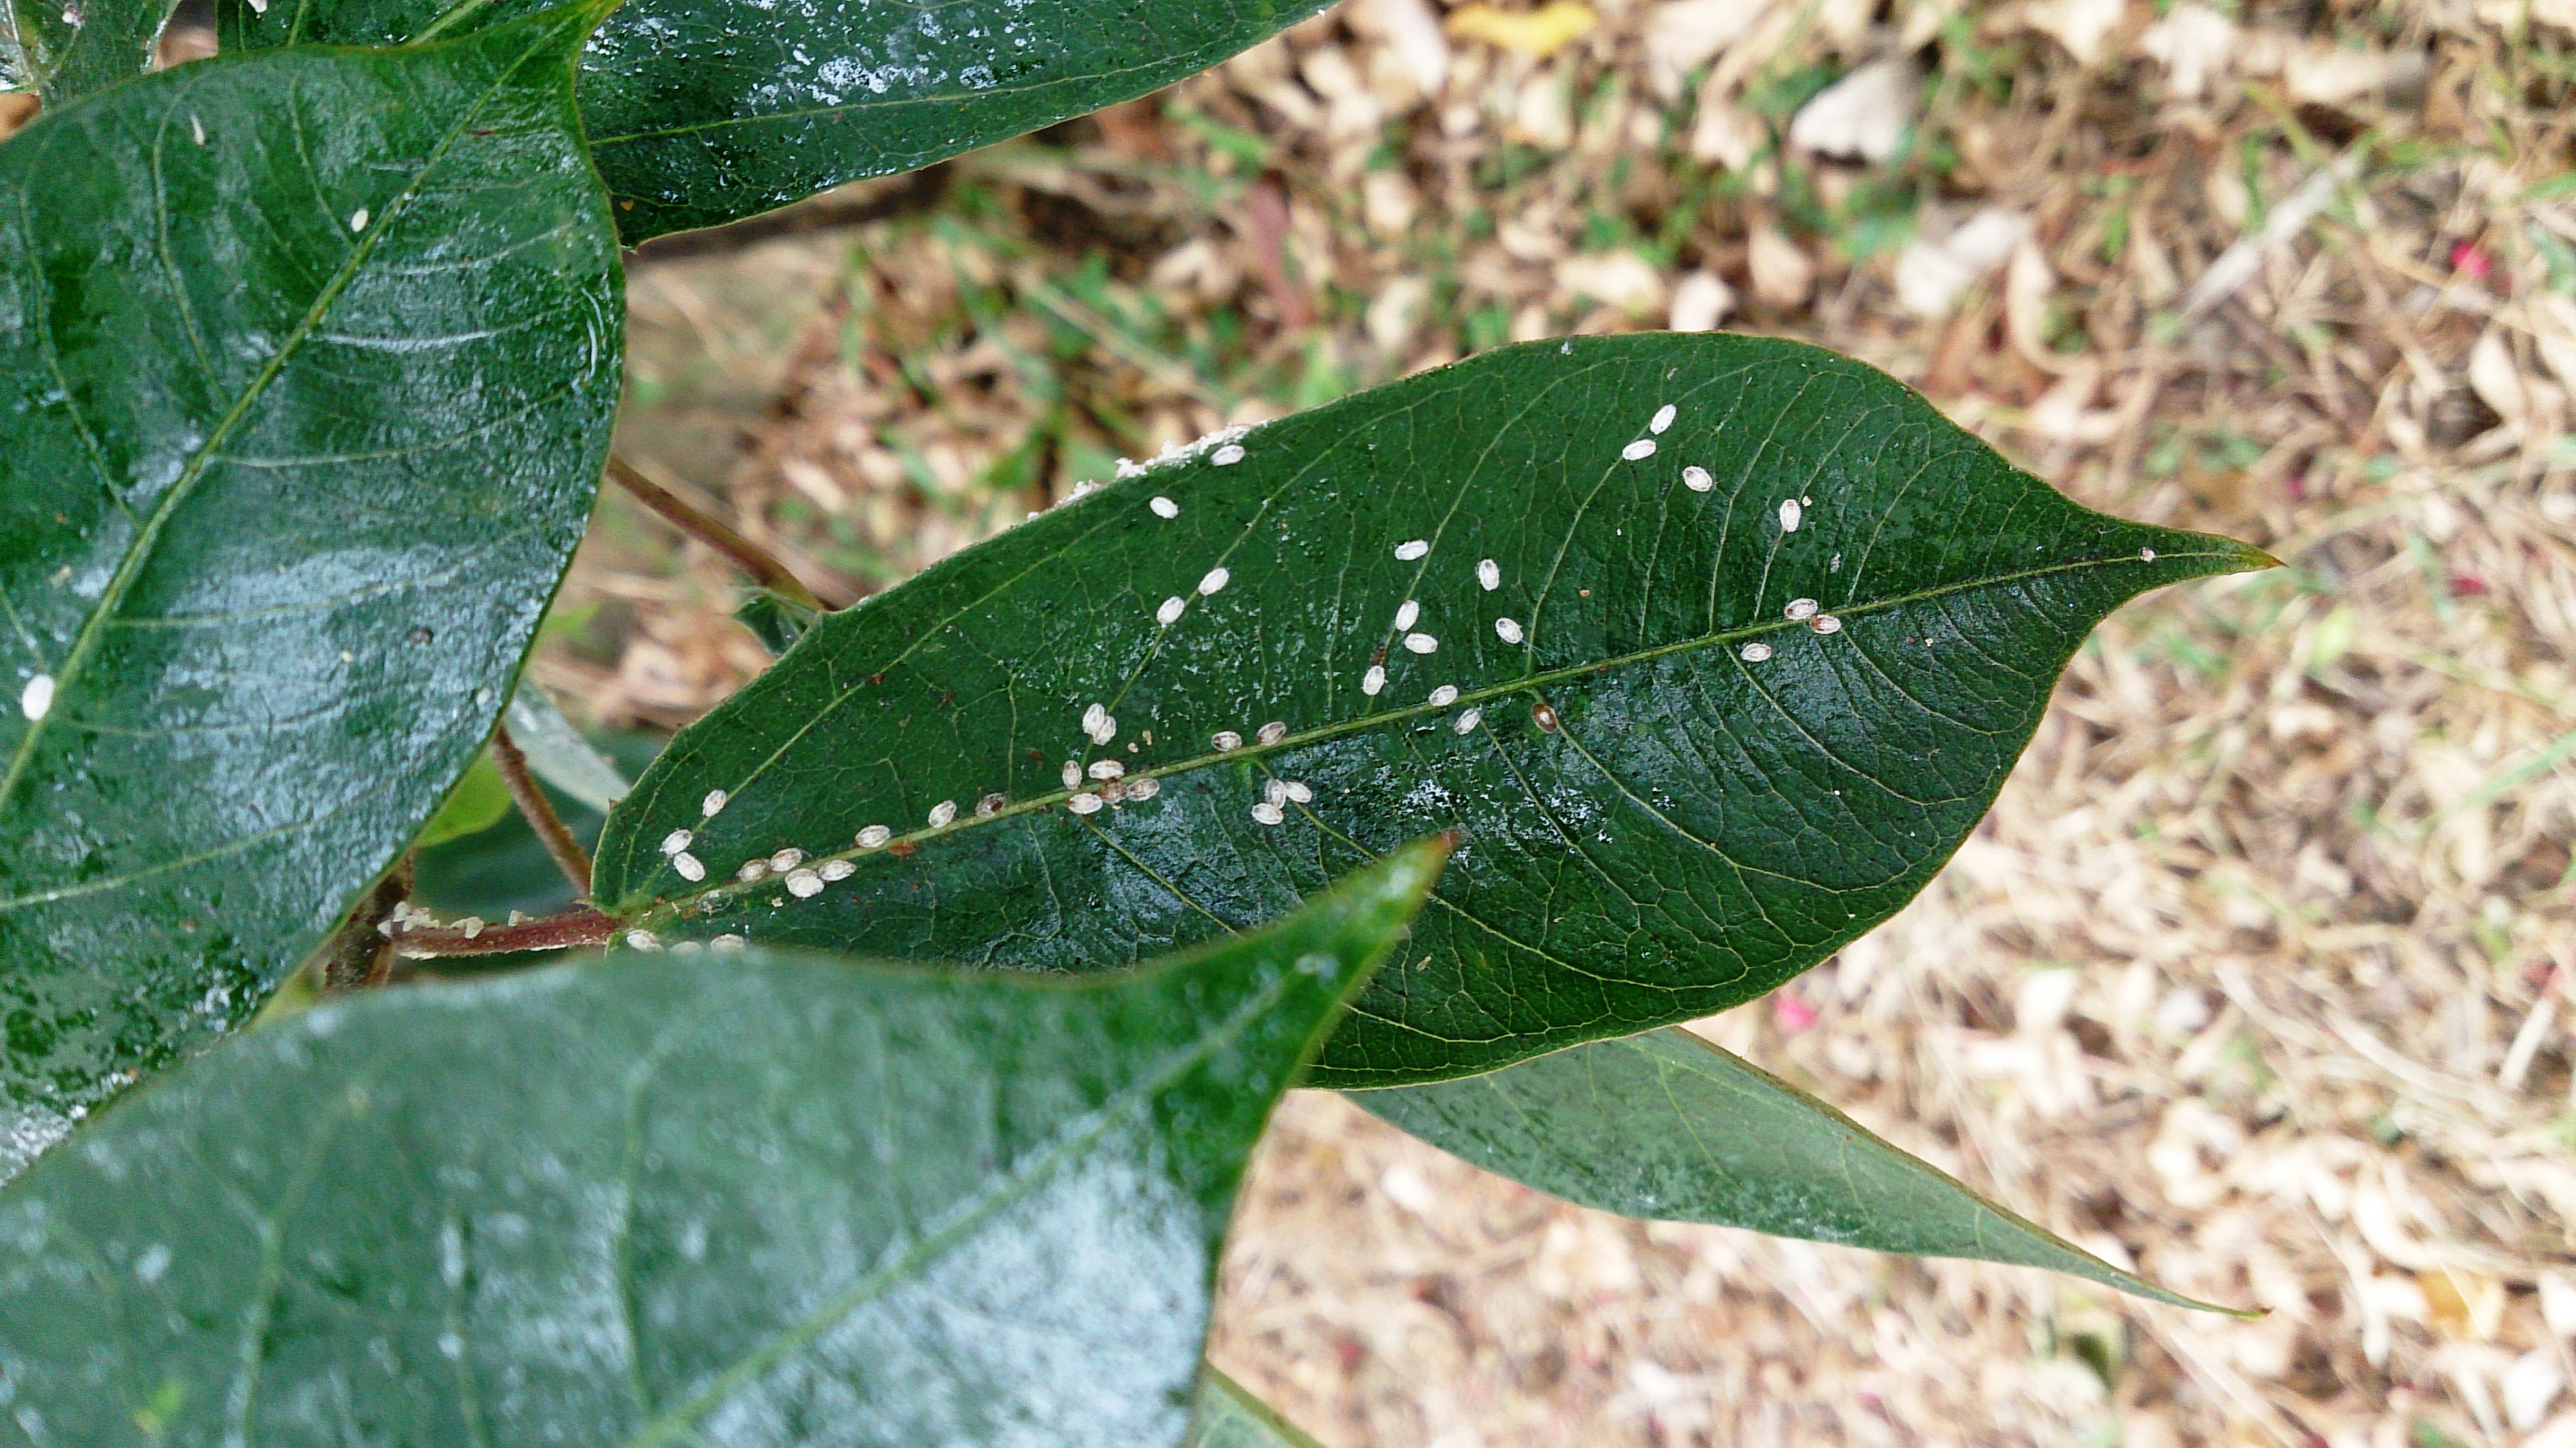 File:White scale insects.jpg - Wikipedia